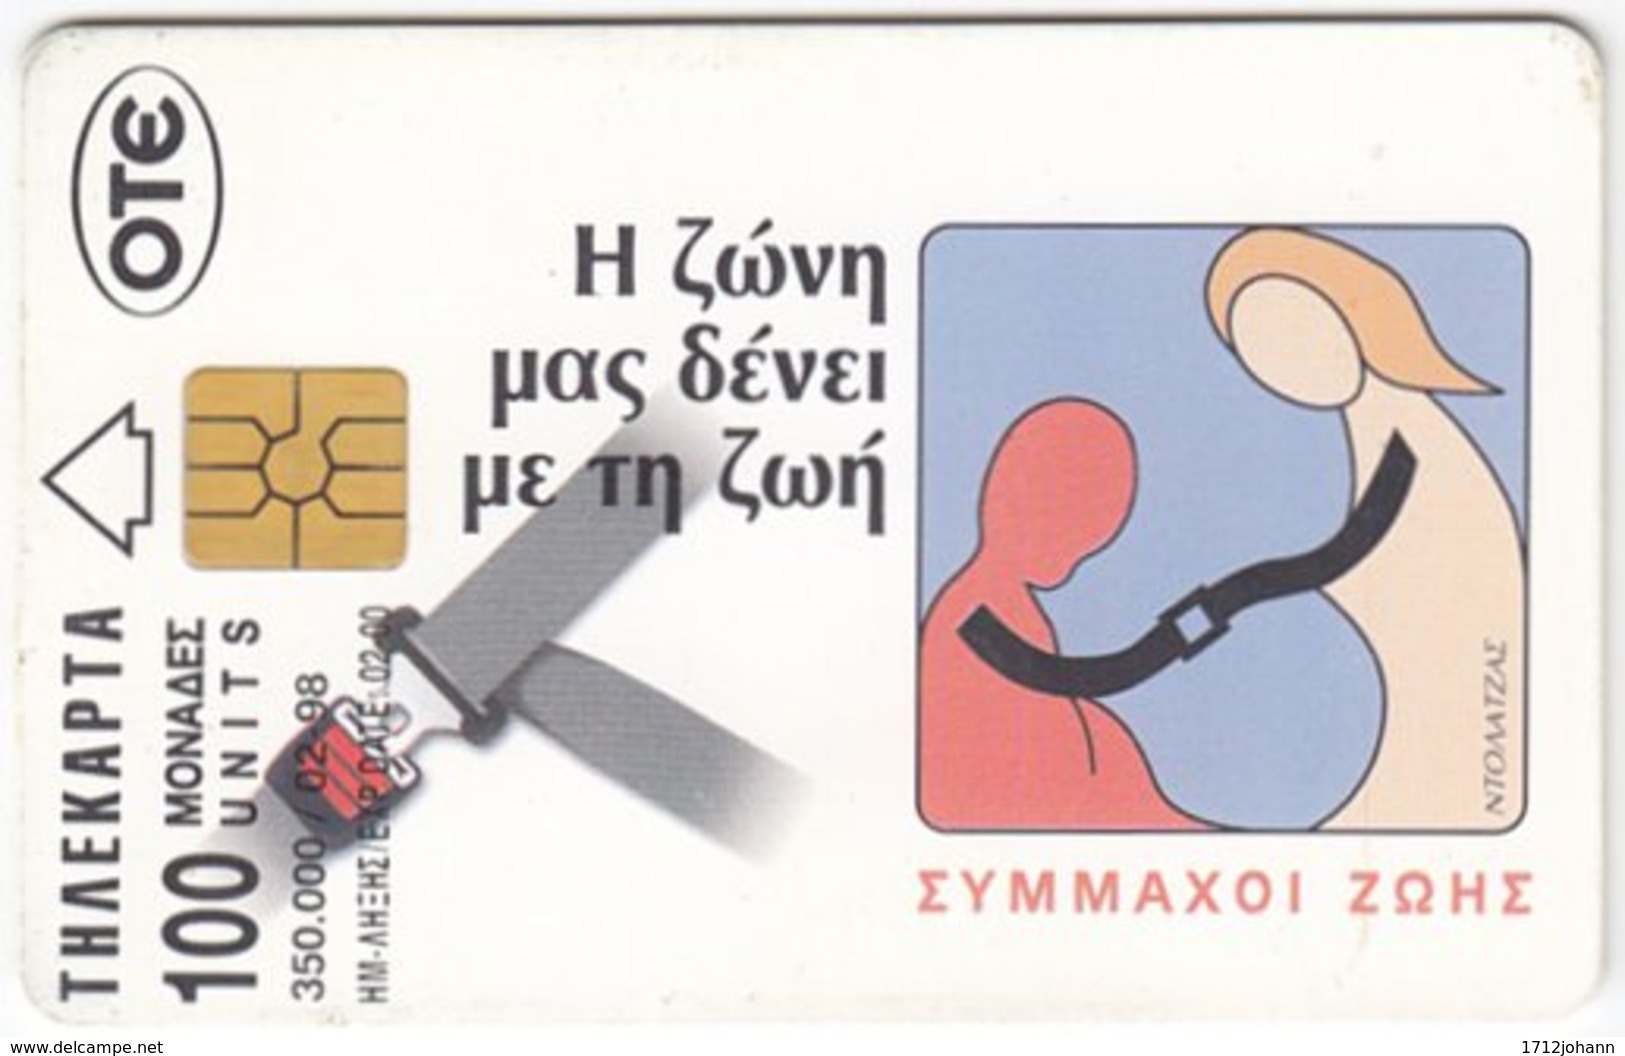 GREECE E-465 Chip OTE - Traffic, Safety - Used - Greece